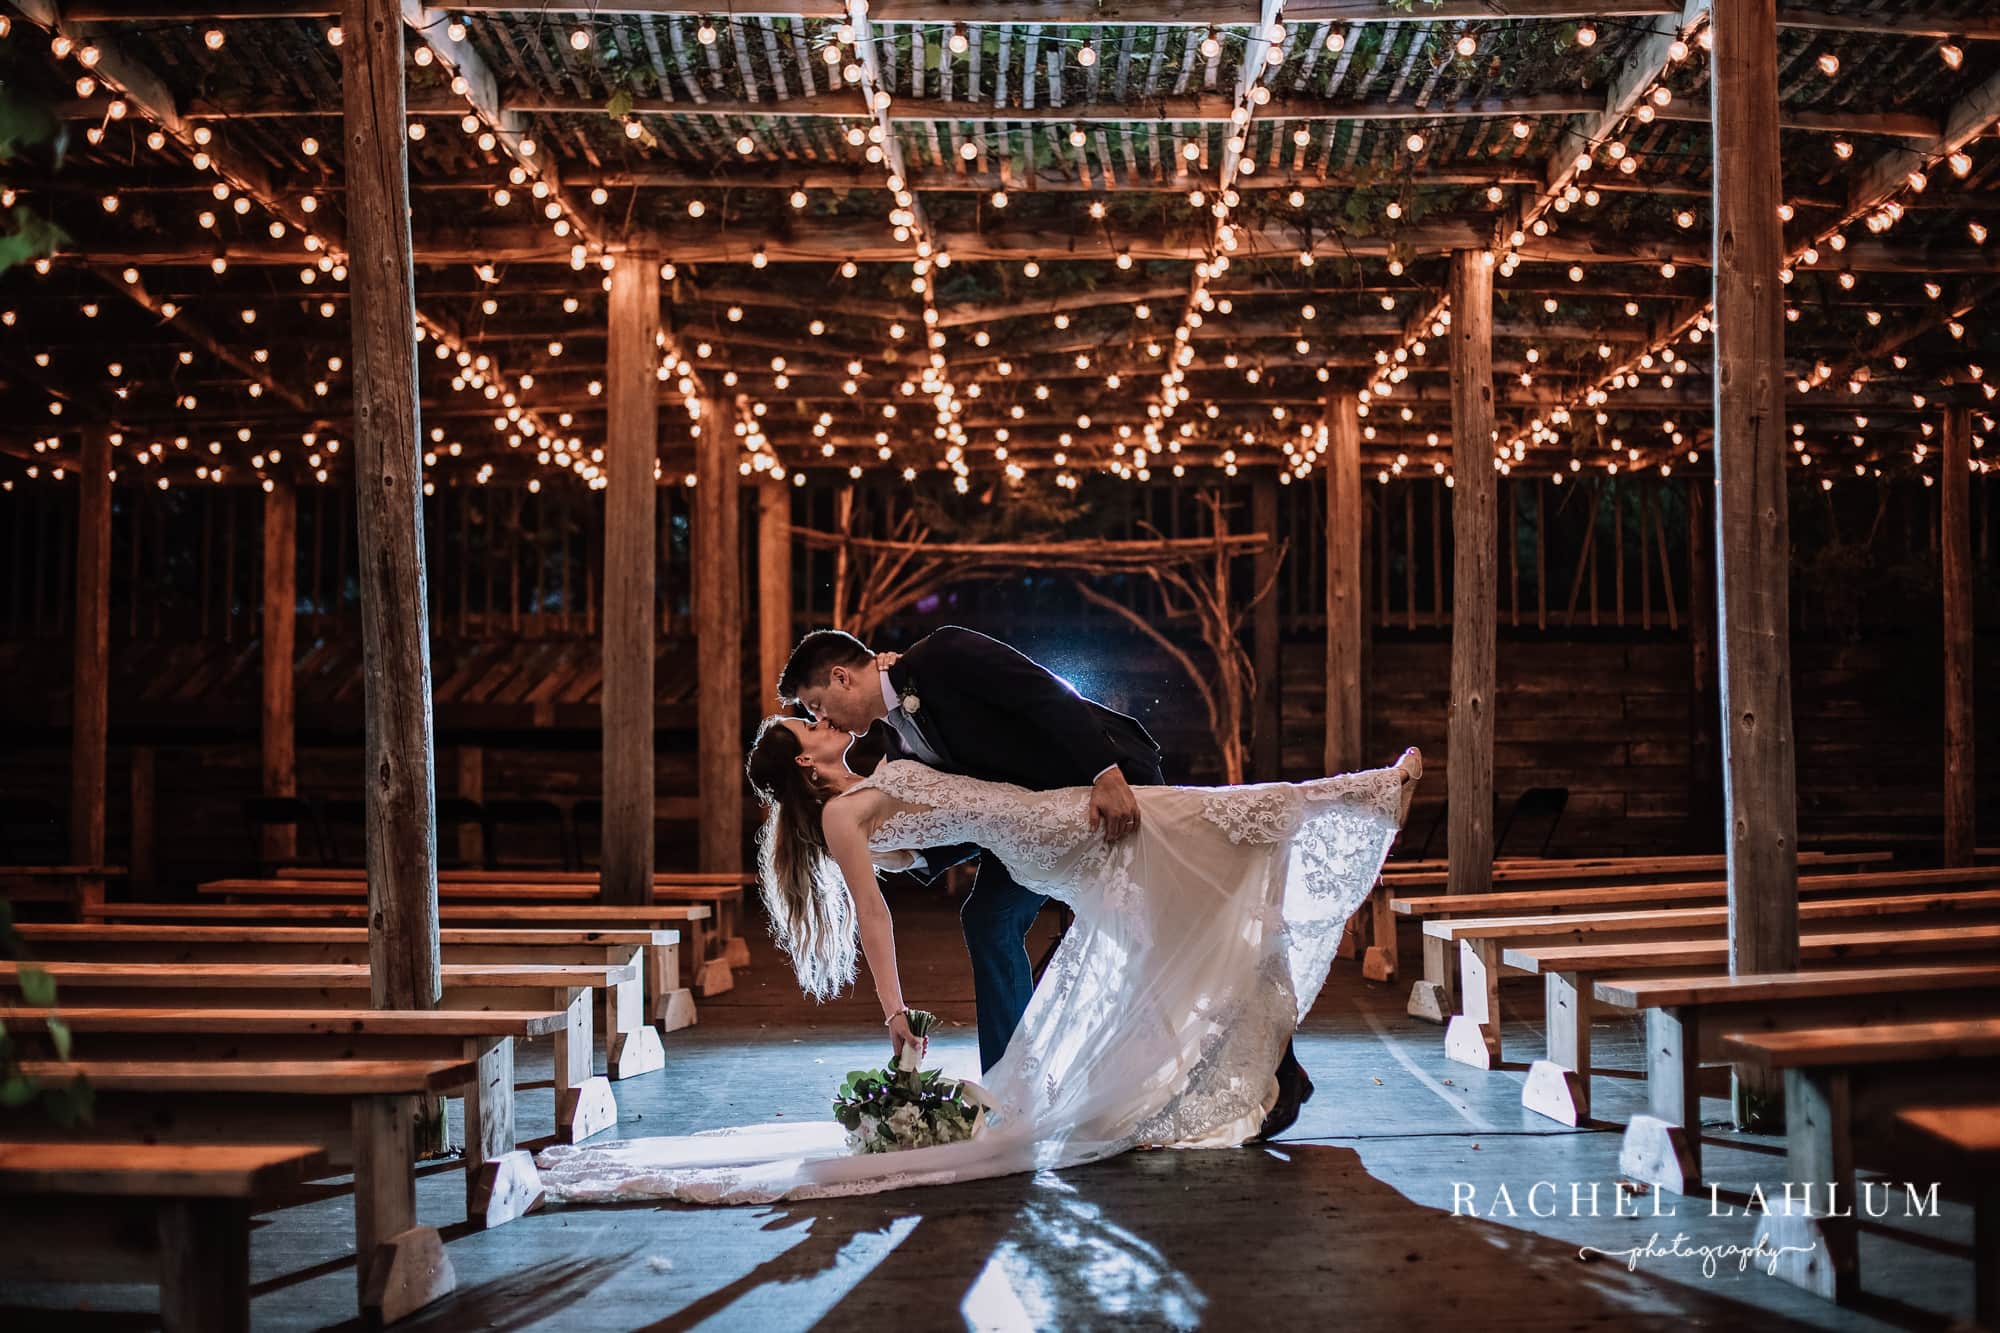 From Acroyoga to Their Wedding Day - Rachel Lahlum Photography